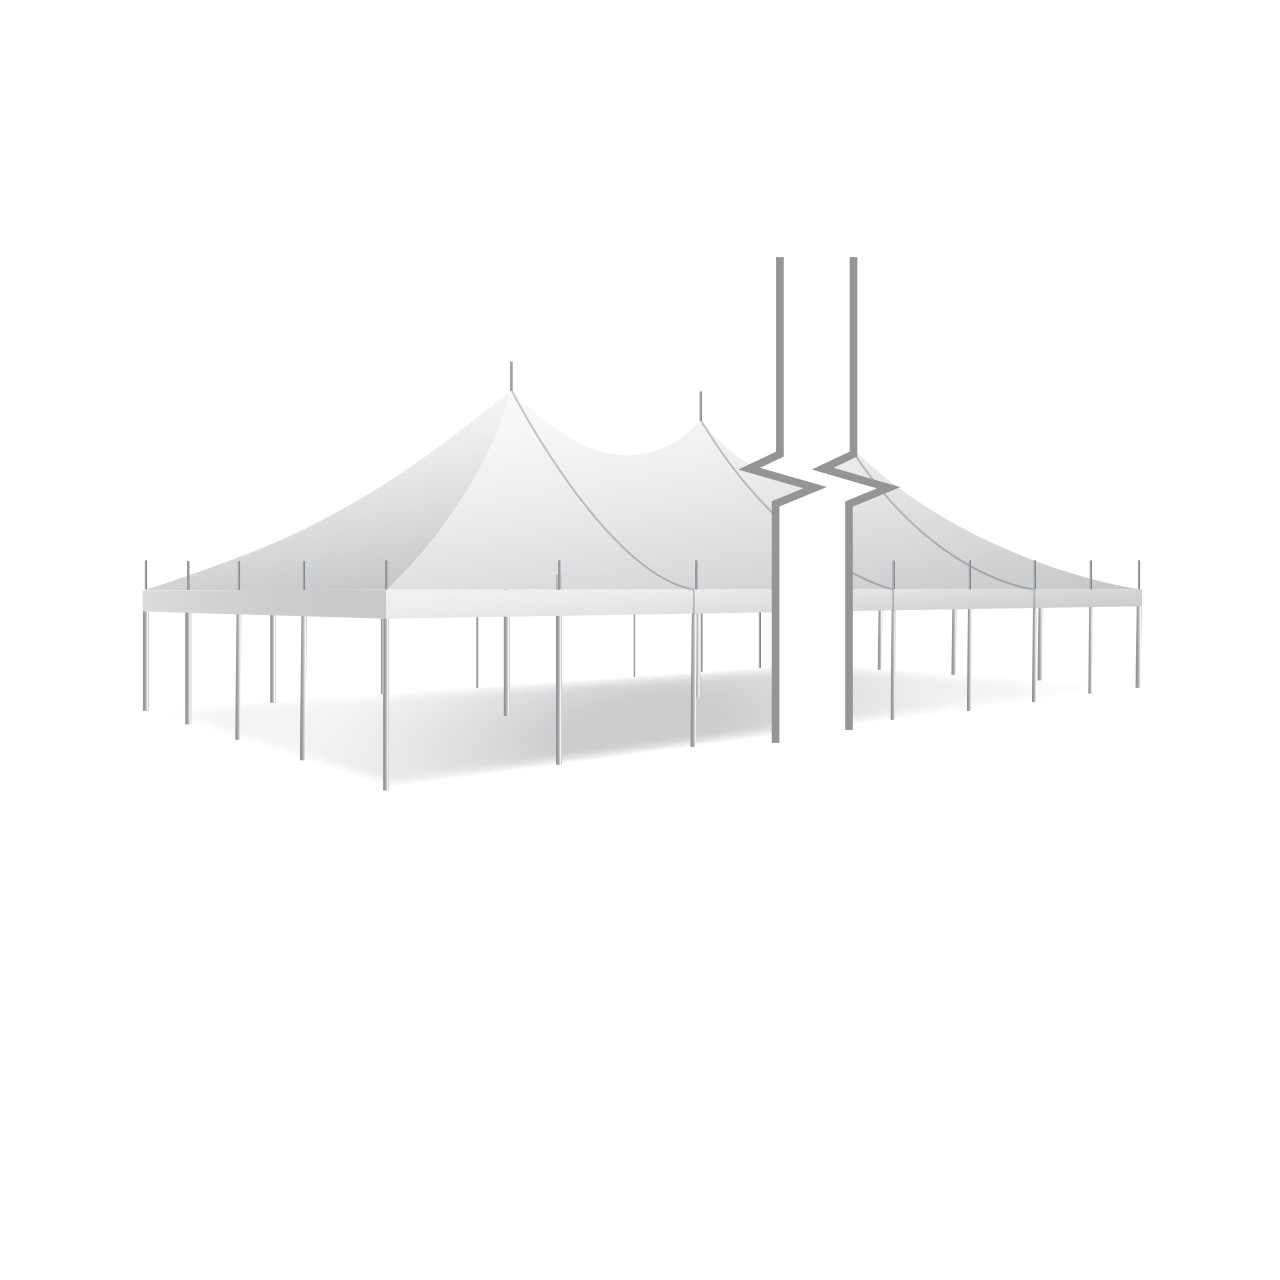 30' x 165' Premiere I Series High Peak Pole Tent, Sectional Tent Top, Complete